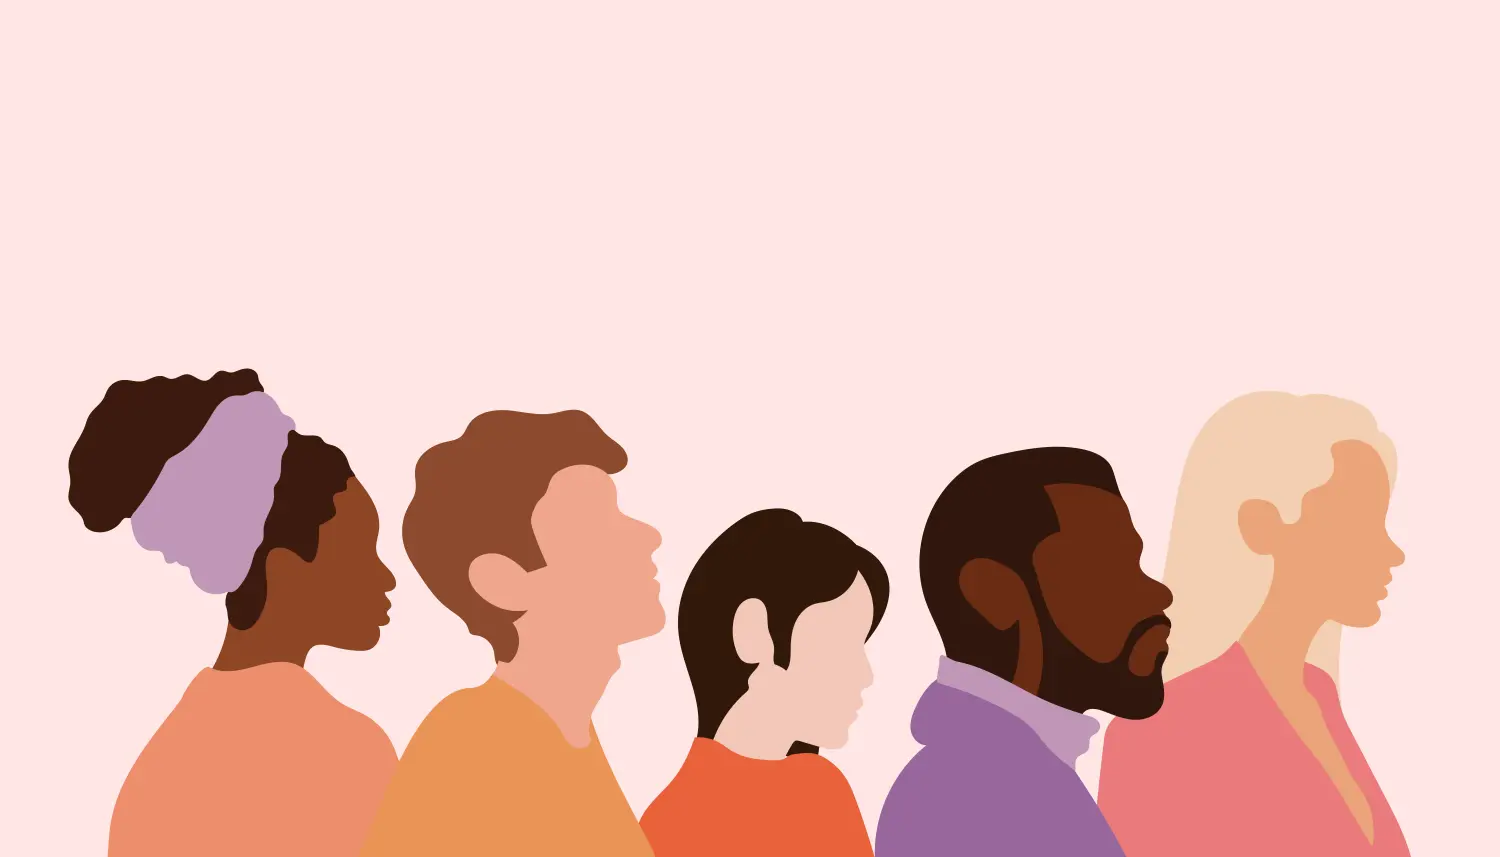 Side profiles of 5 diverse individuals' on pink background